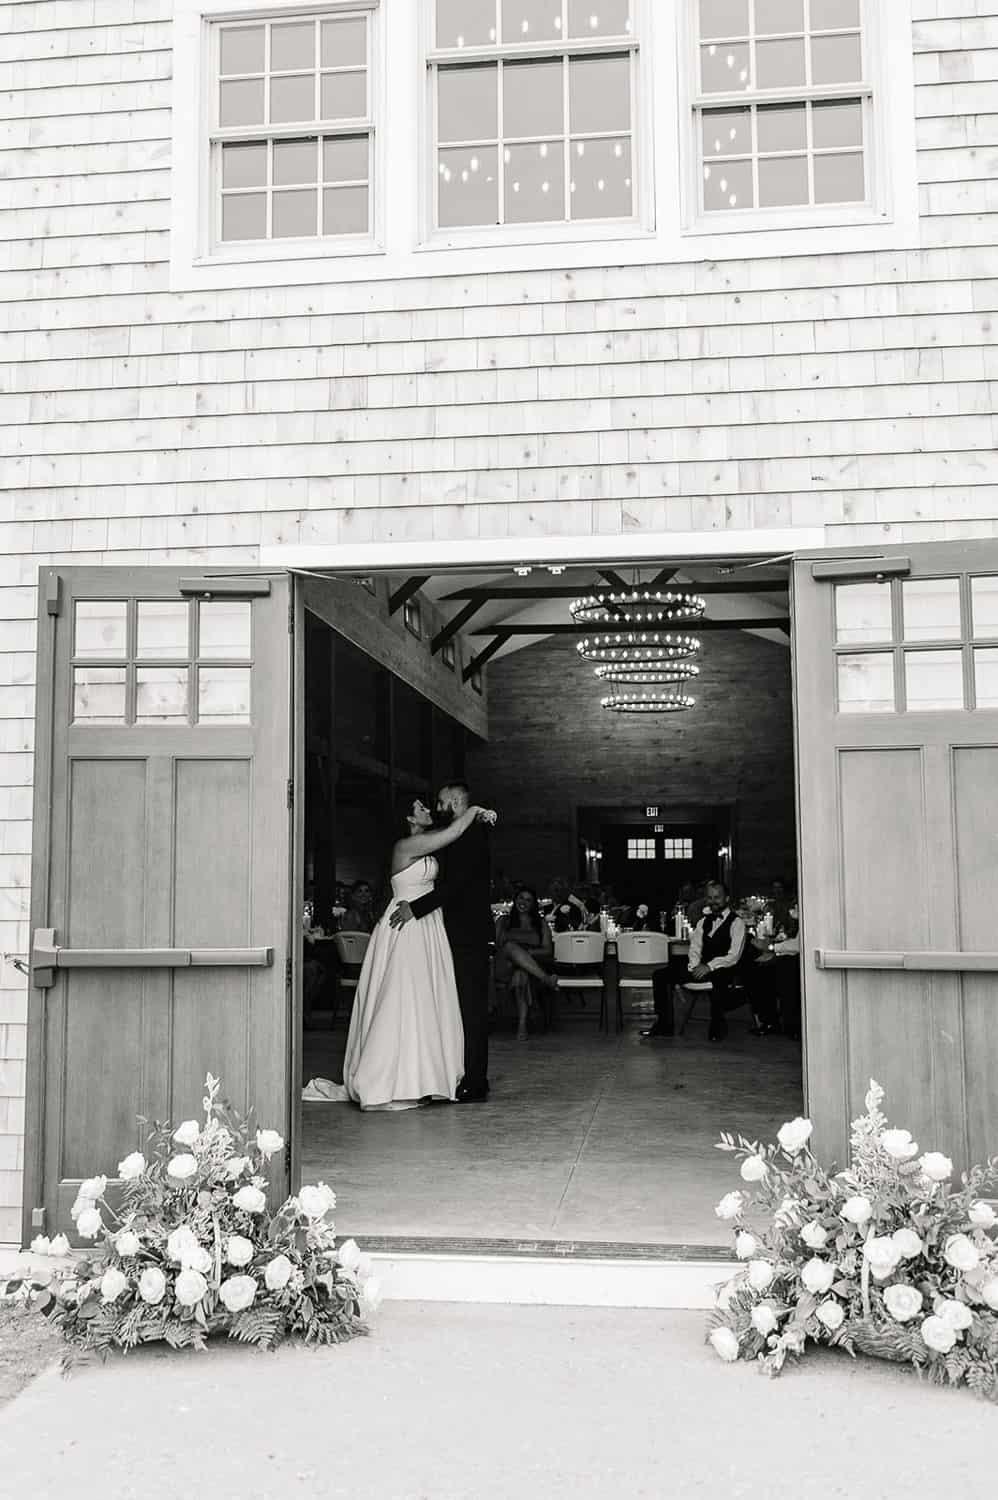 A black and white photo of a bride and groom dancing inside a barn with open doors, surrounded by guests and floral decorations.